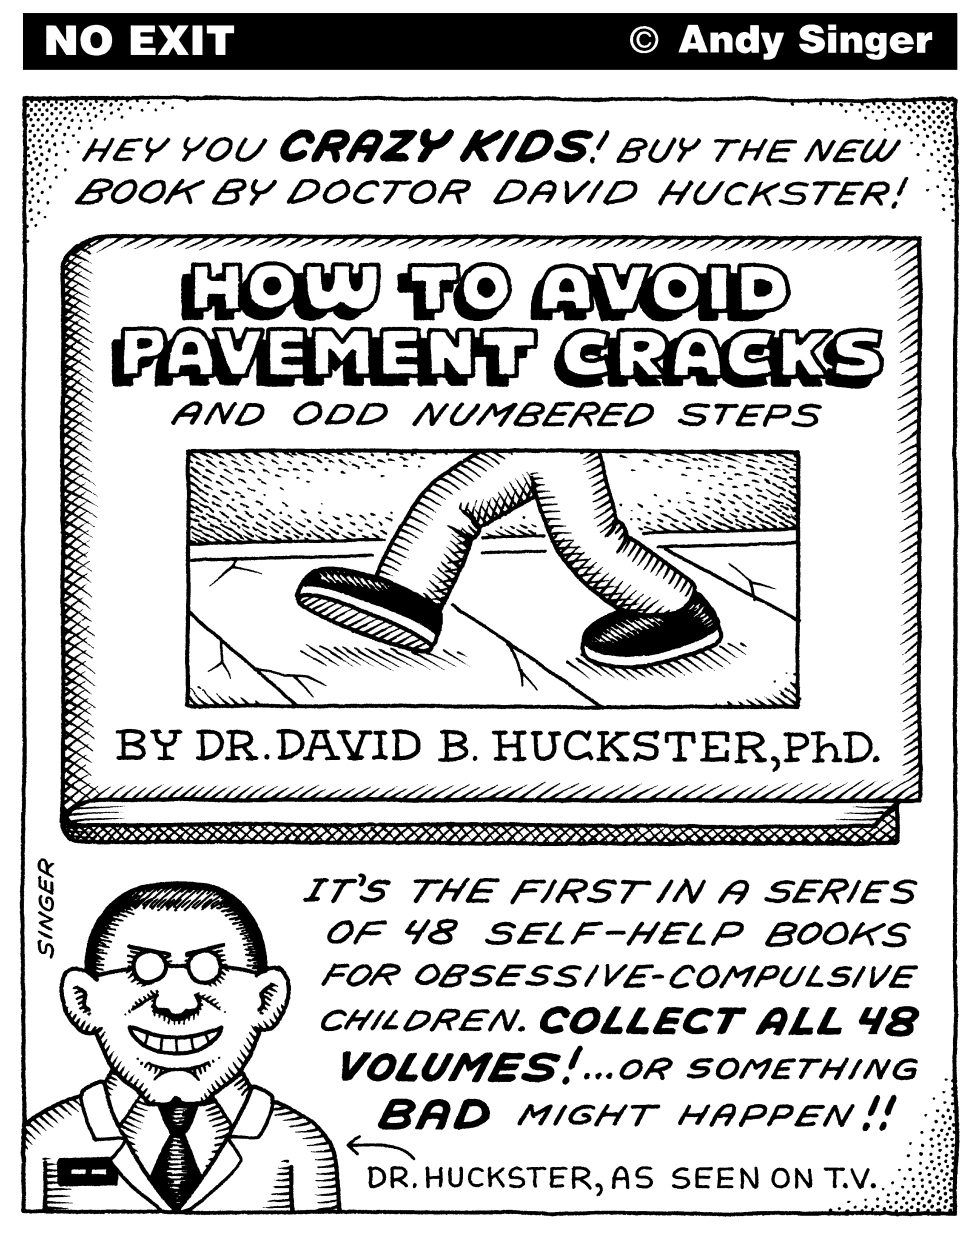 SELF HELP BOOKS FOR CHILDREN by Andy Singer